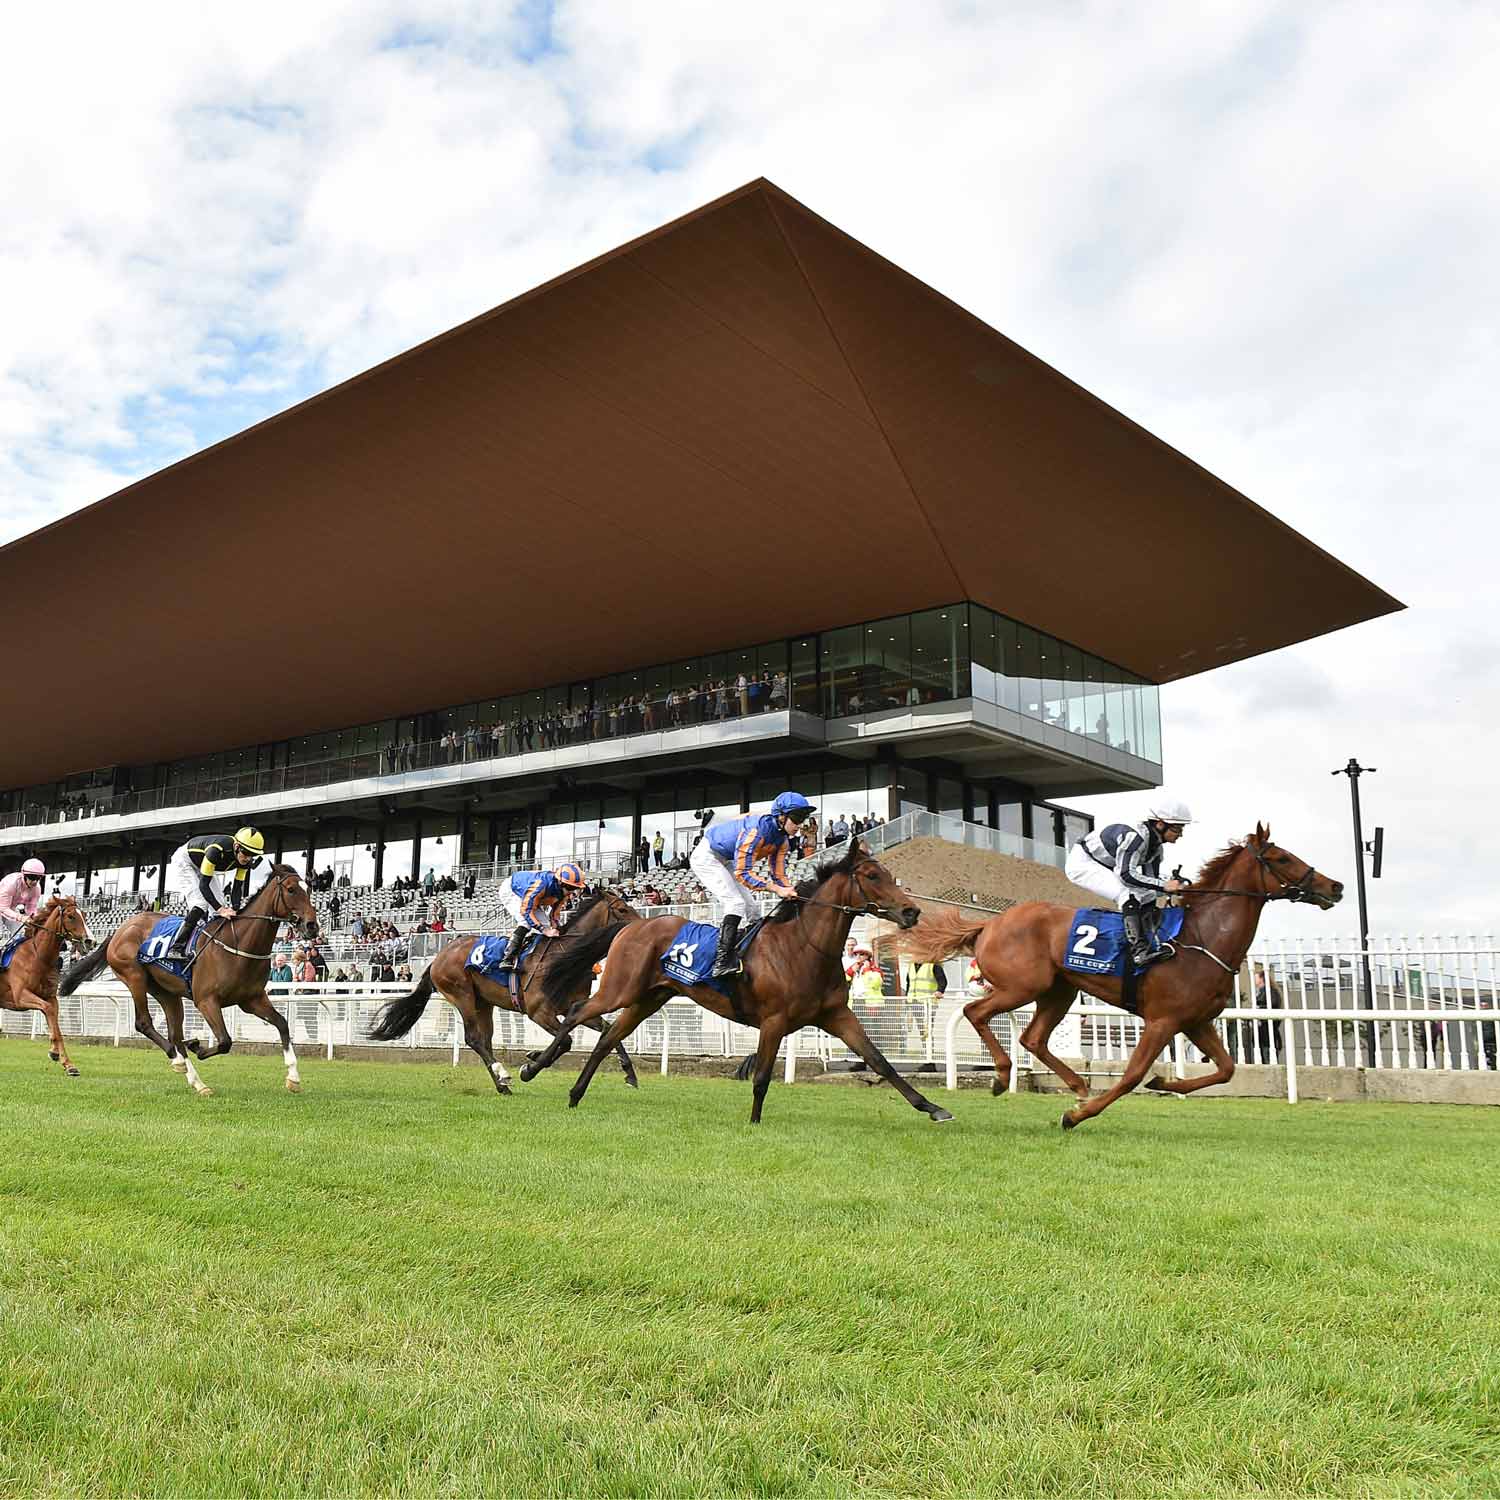 Curragh, a new racecourse grandstand with supporting infrastructure facilities